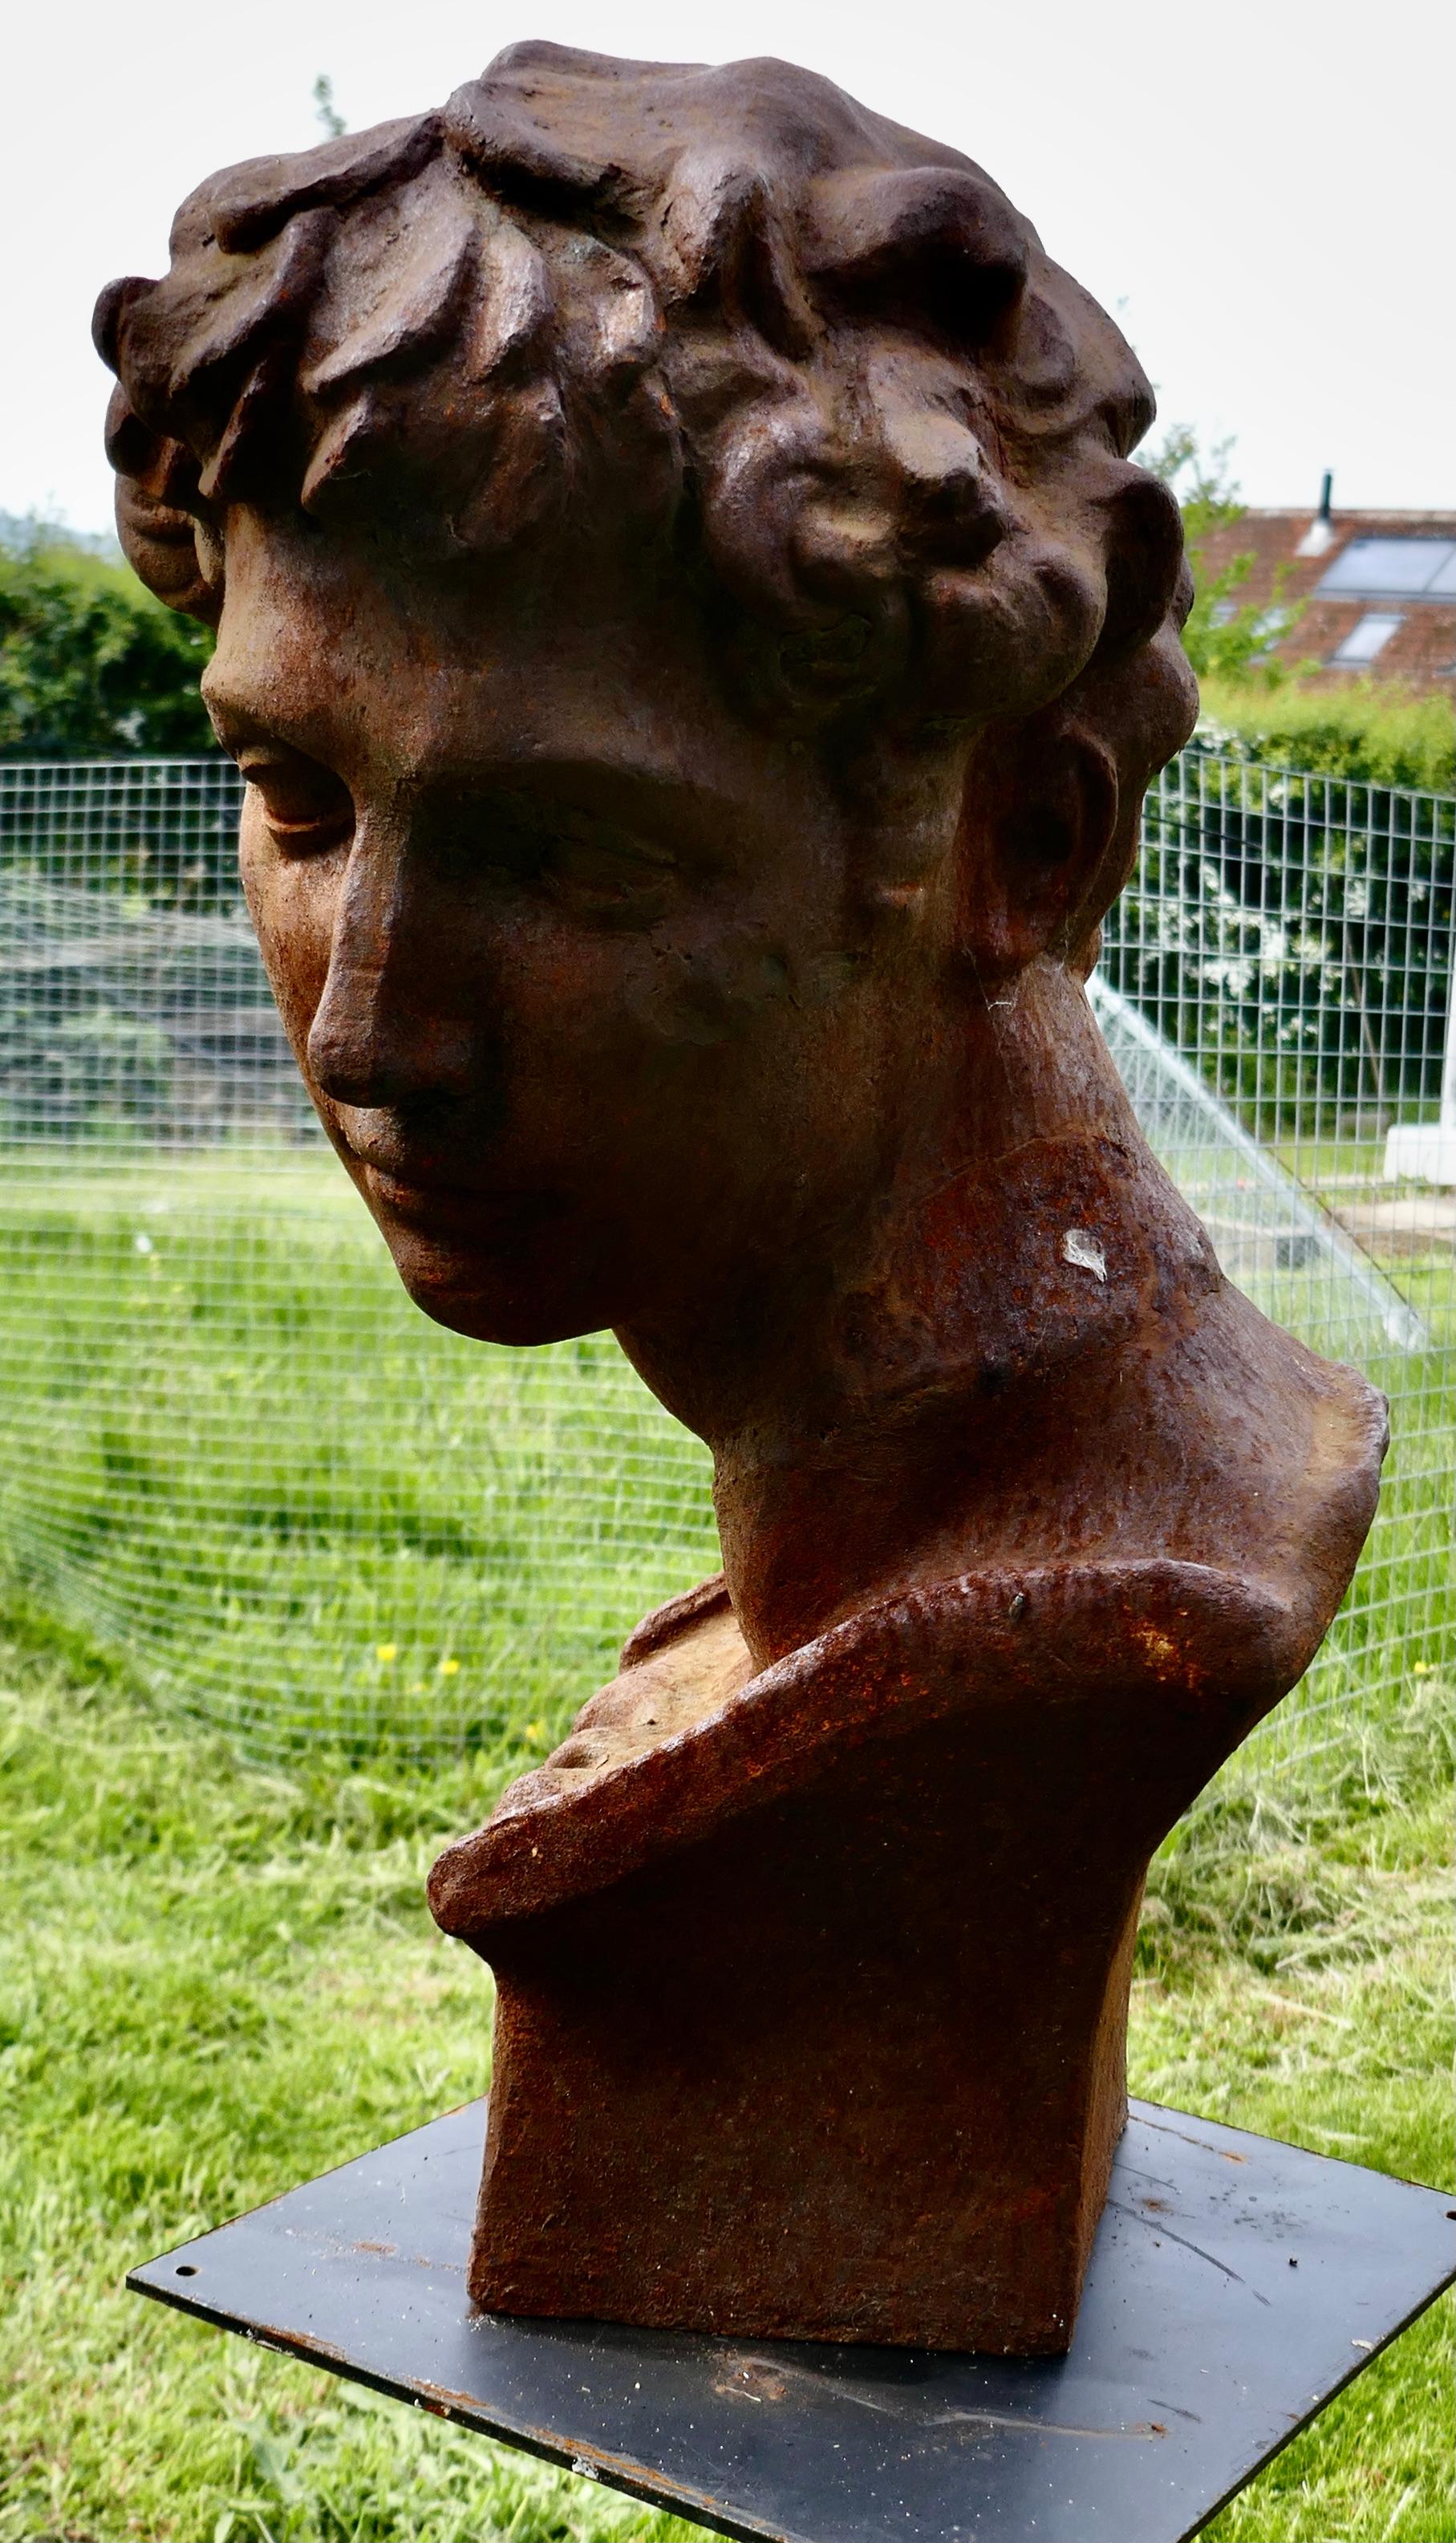  Weathered Cast Iron Statue of Michelangelo's David  

A lovely piece for the garden, celebrating “David”
The Bust is weather worn and has a rusty patina, it is otherwise in good condition 
The Bust is 24” high and approximately 12” in diameter
MS240